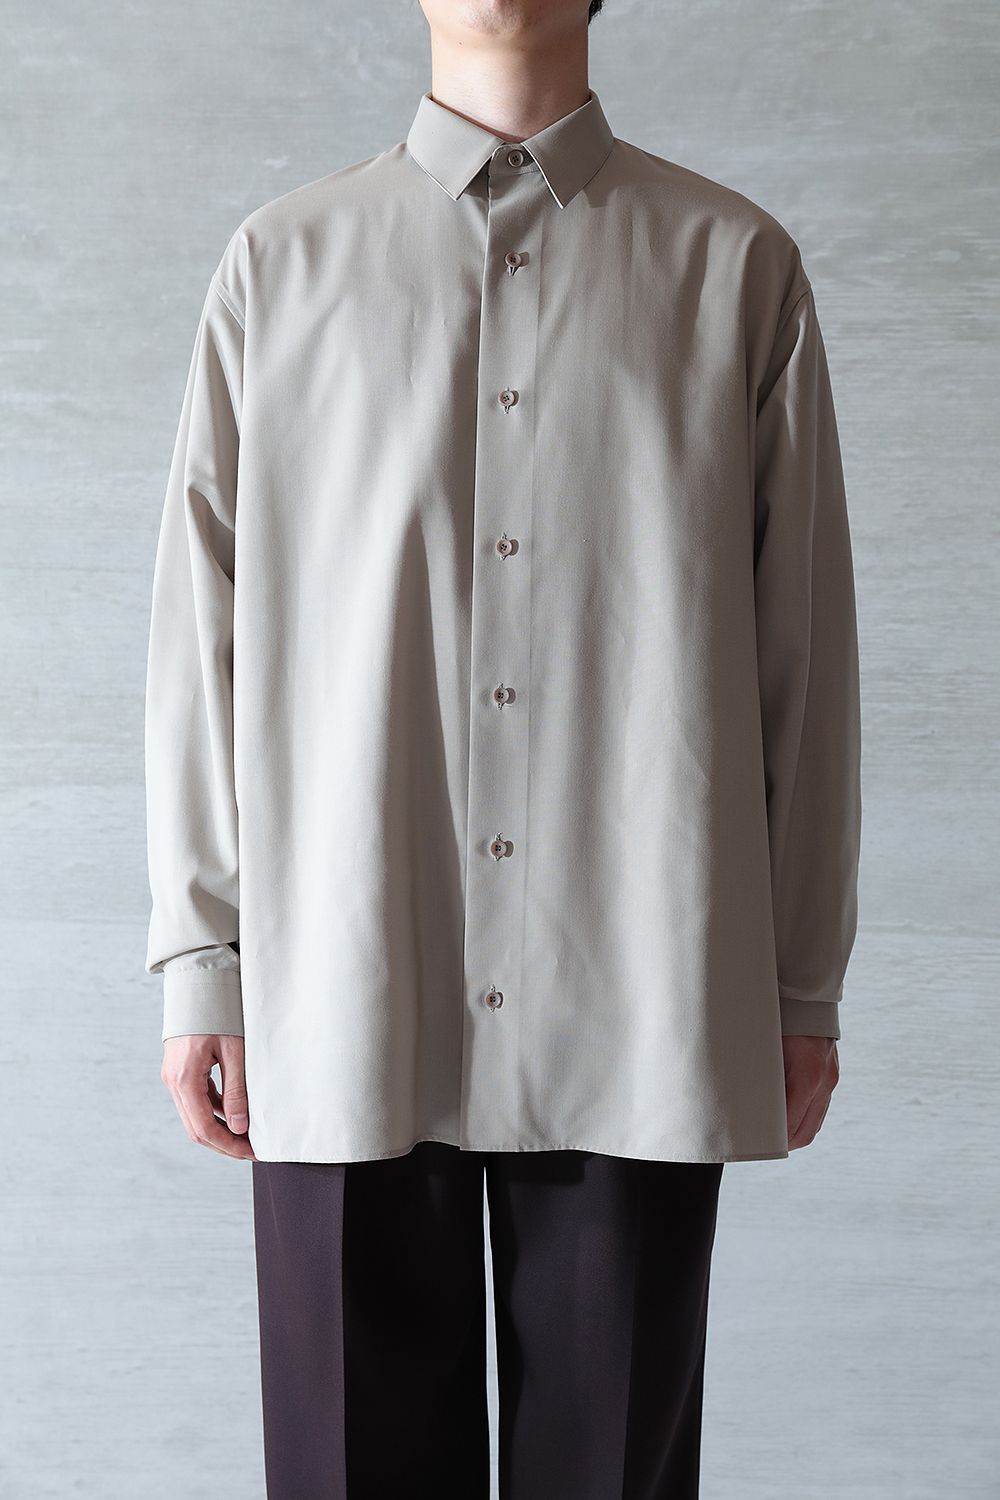 THE RERACS - 【23AW】THE PERFECT SHIRT(GREGE) | Acacia ONLINESTORE